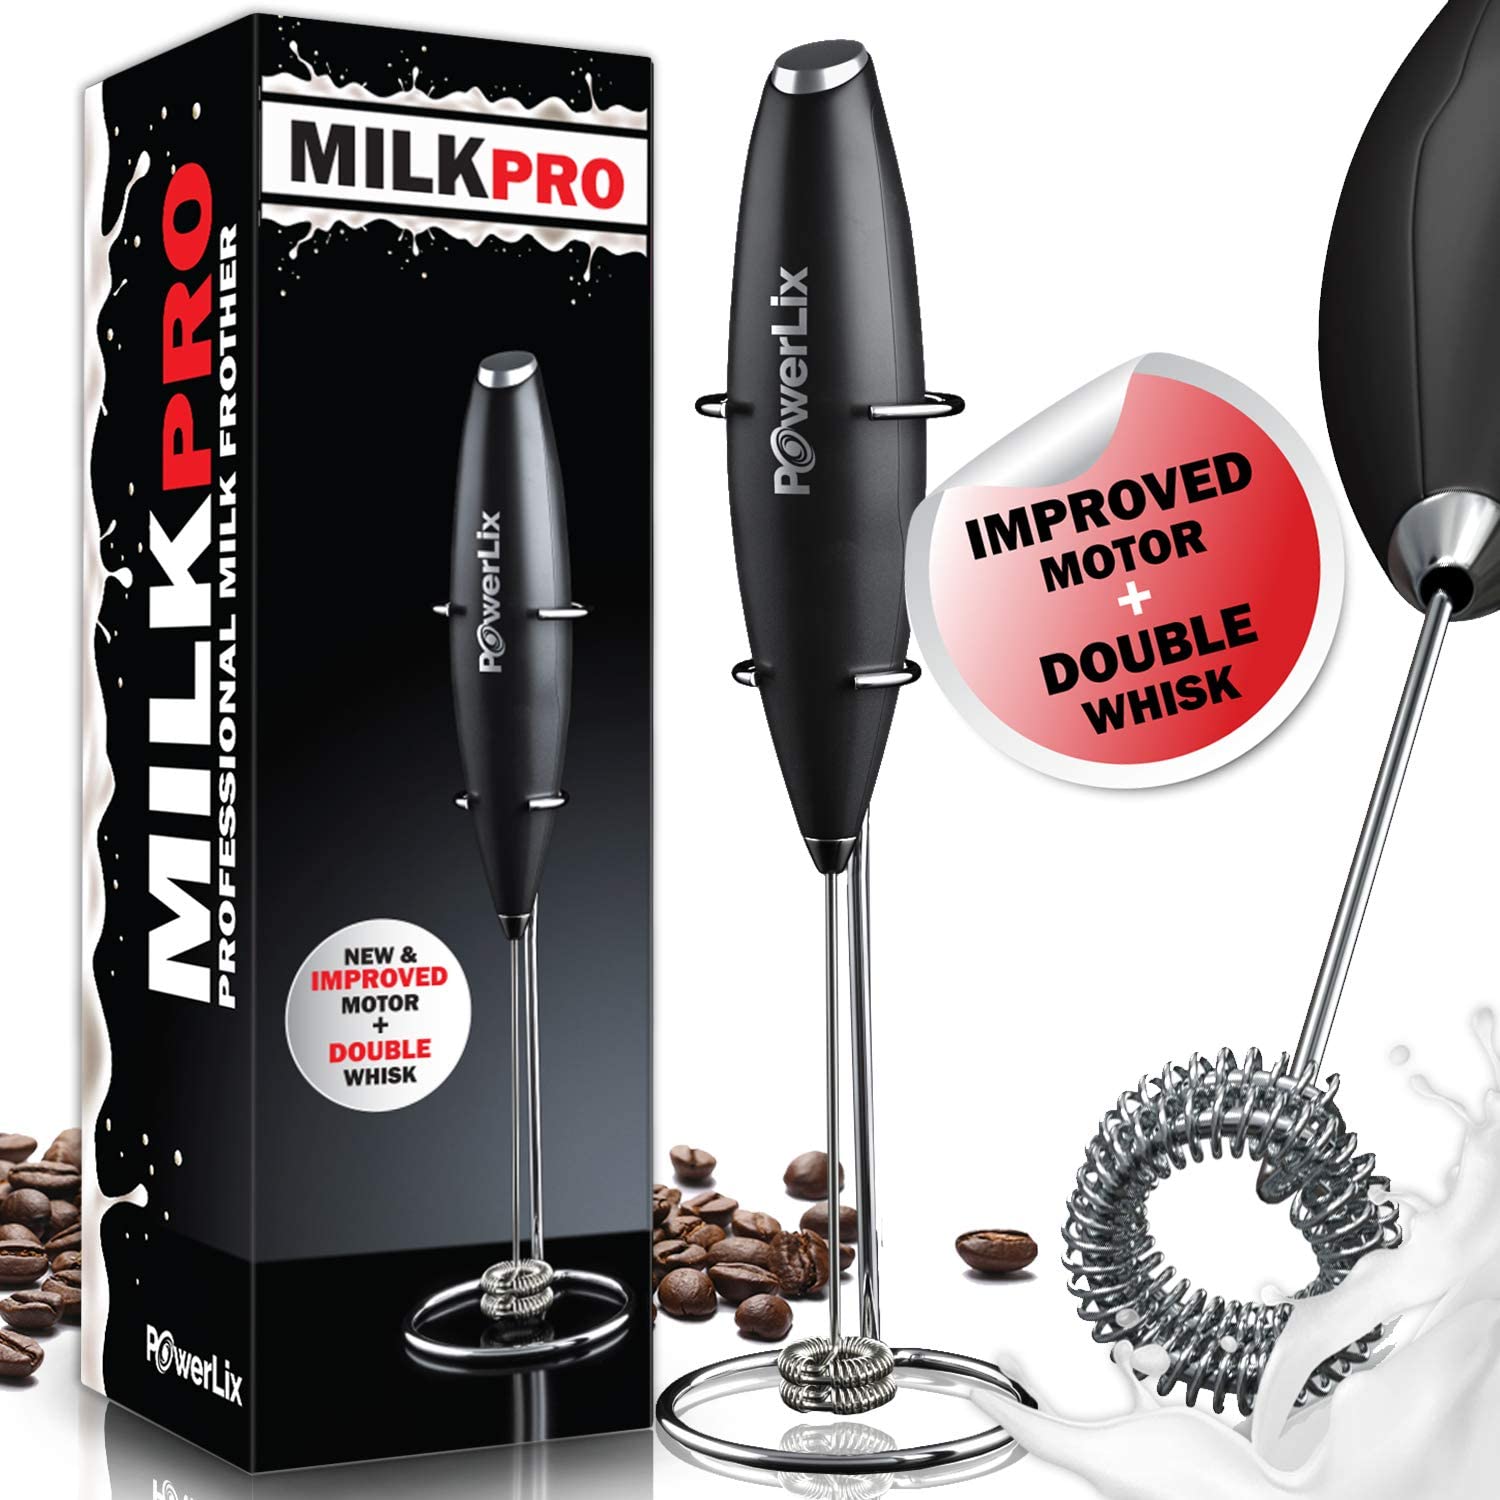 Powerlix Milk Pro Professional Milk Frother: 3 Month Review 